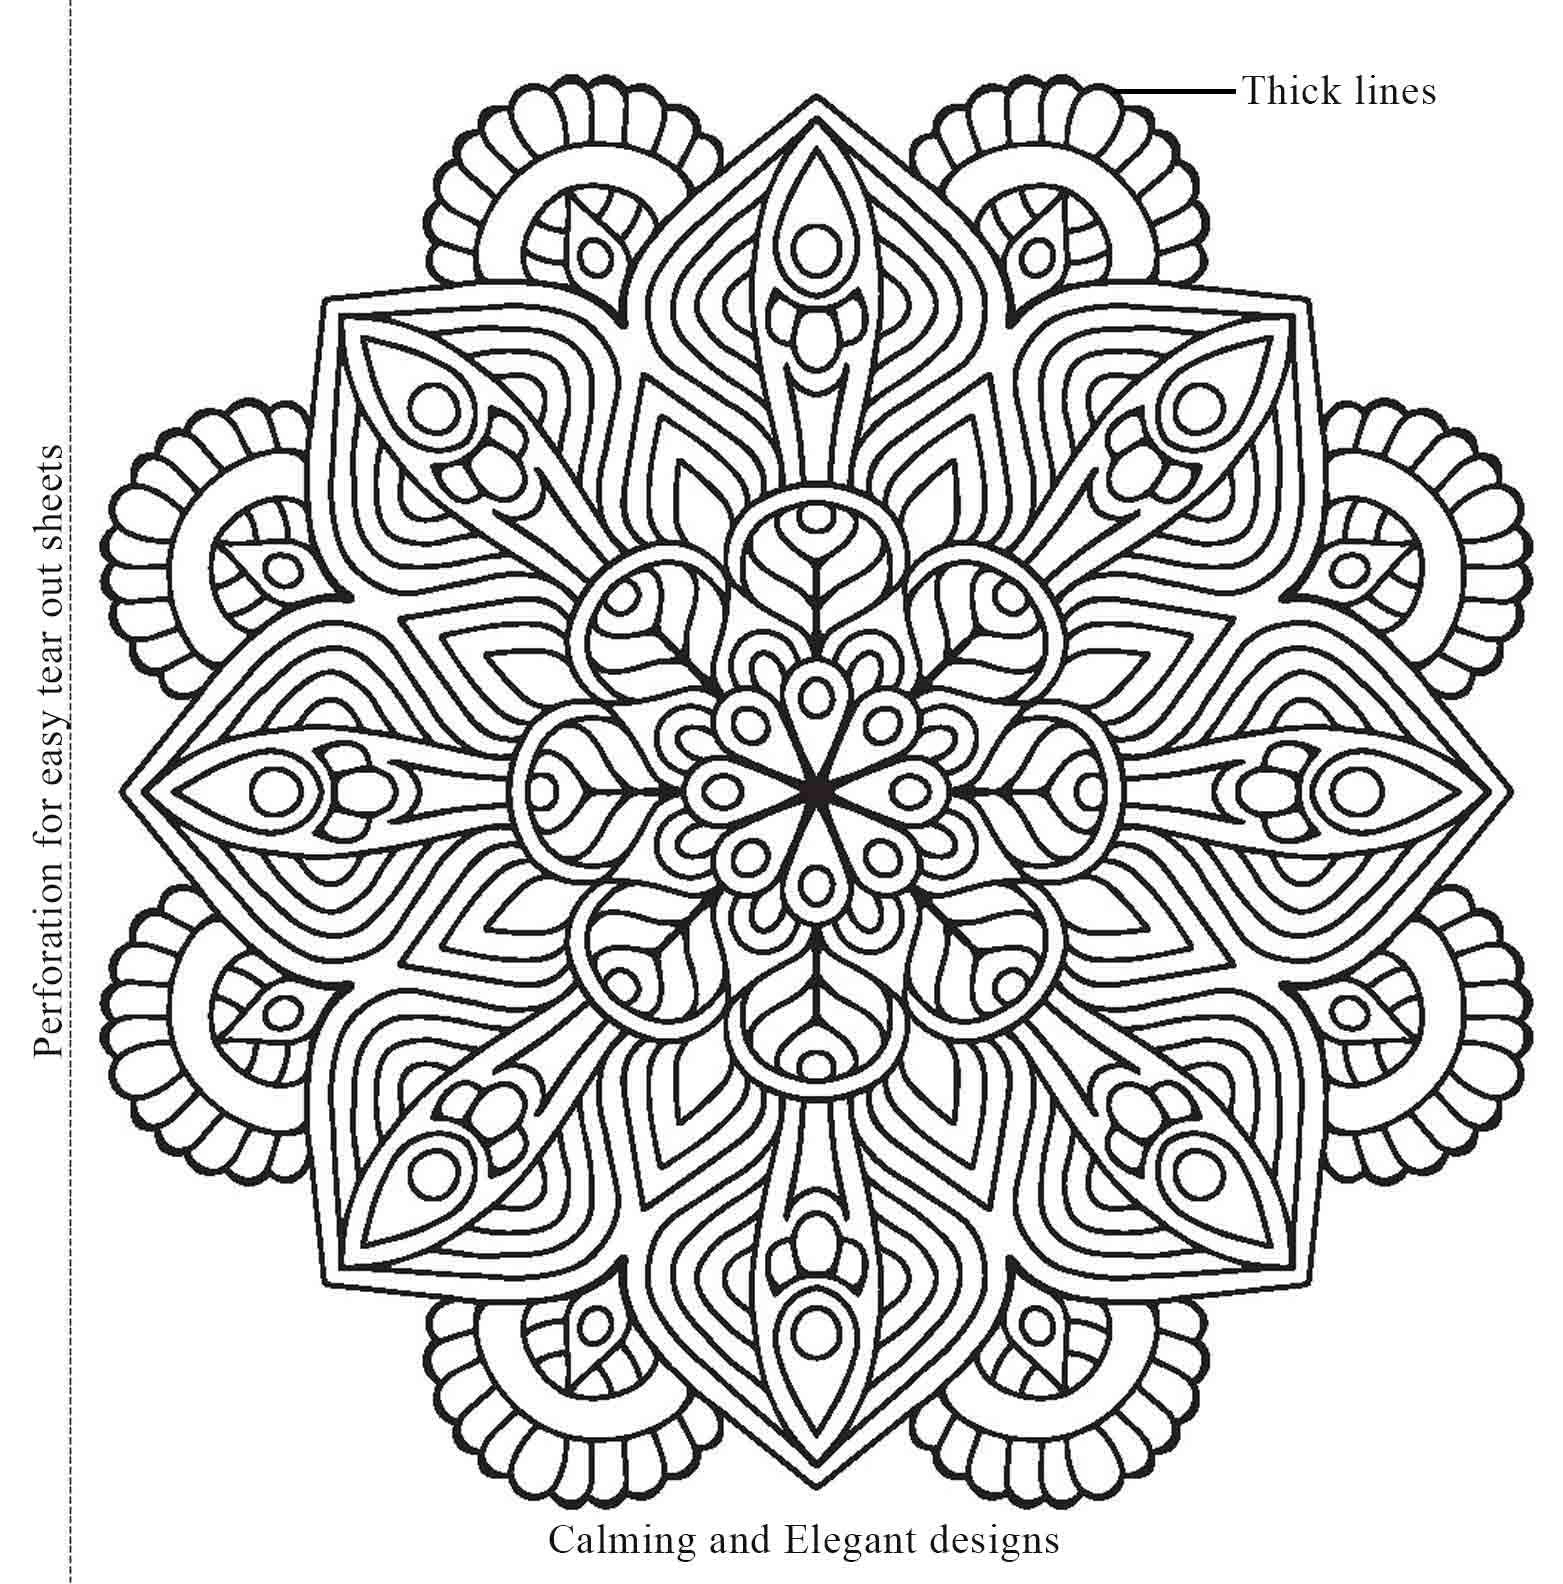 Buy Impala Coloring Book: Stress Relief Zentangle Picture, Freestyle Drawing  Pages Book Online at Low Prices in India | Impala Coloring Book: Stress  Relief Zentangle Picture, Freestyle Drawing Pages Reviews & Ratings -